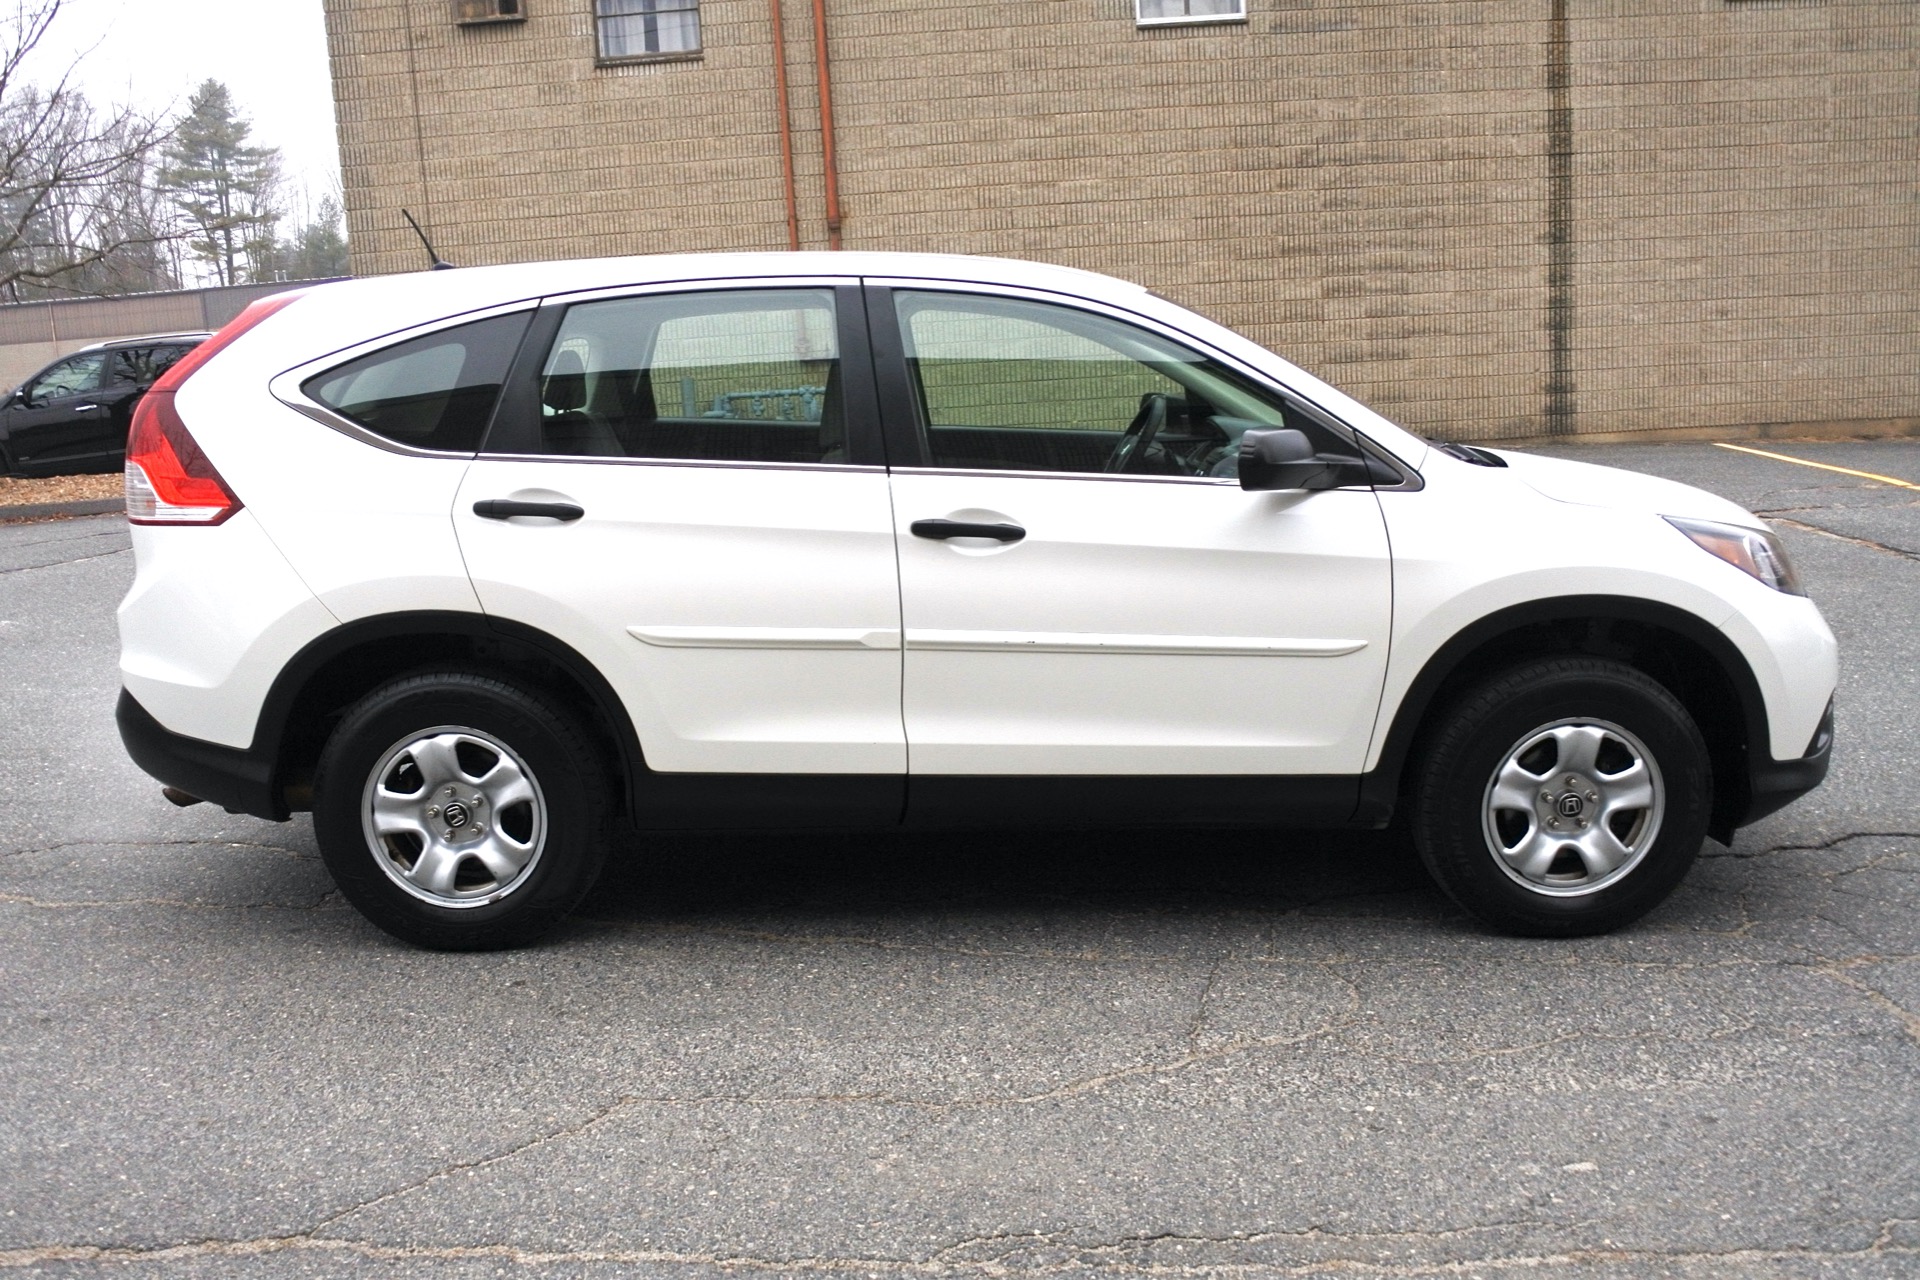 Used 2013 Honda Cr-v AWD 5dr LX For Sale ($7,495) | Metro West ...